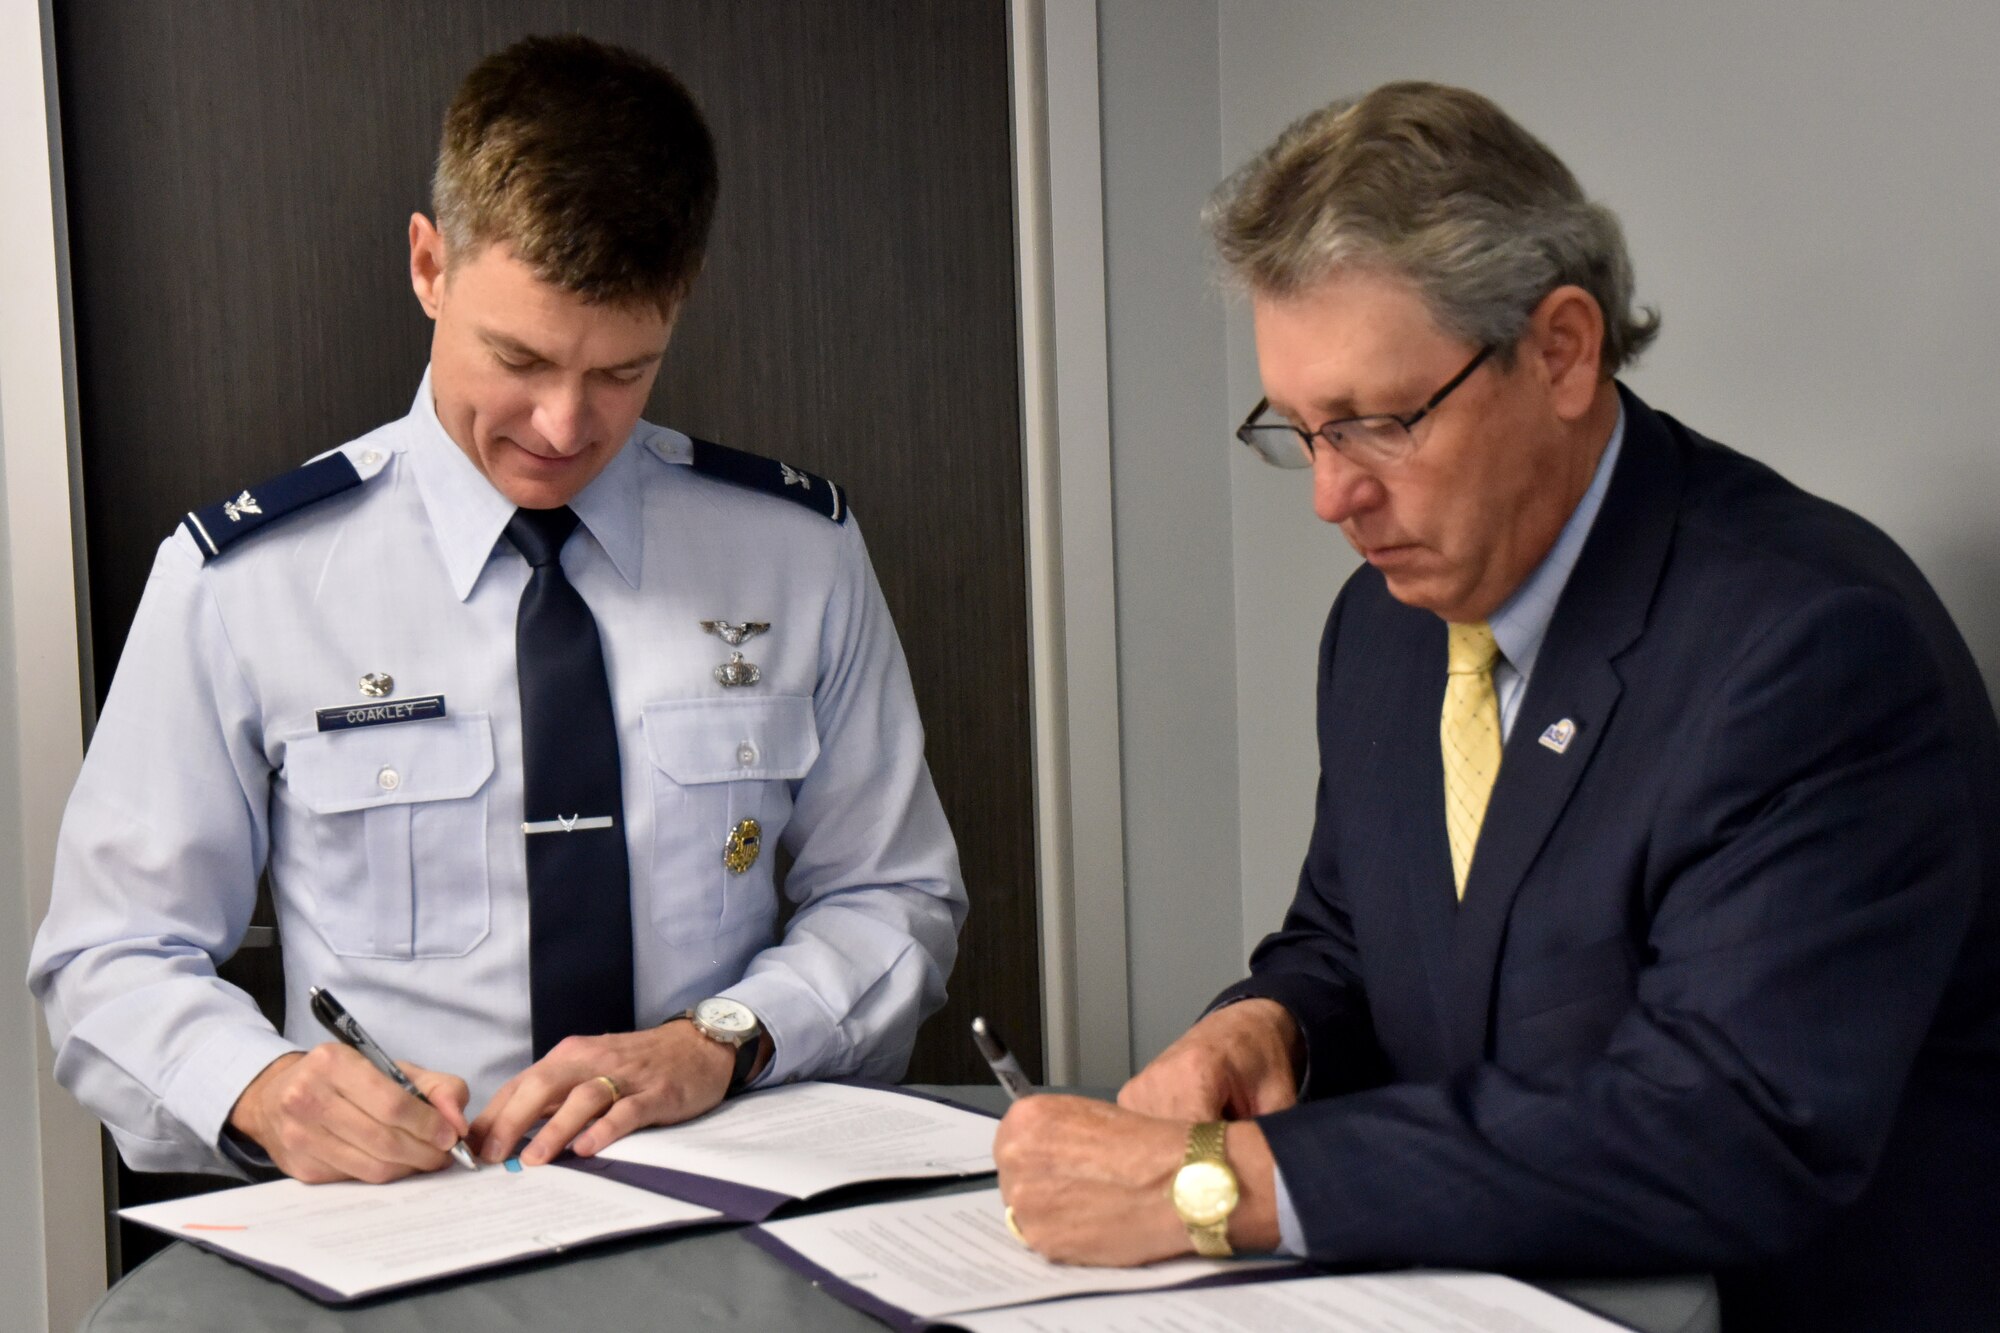 U.S. Air Force Col. Thomas Coakley, 17th Training Group commander, signs the Doolittle Speaker Series Memorandum of Understanding alongside Angelo State University Provost Dr. Donald Topliff at the Business Resource Center on Jan. 25, 2019. This MOU will help both community and base members enhance professional understanding of key events and topics based on insights from prominent speakers. (U.S. Air Force photo by 2nd Lt. Matthew Stott/Released)